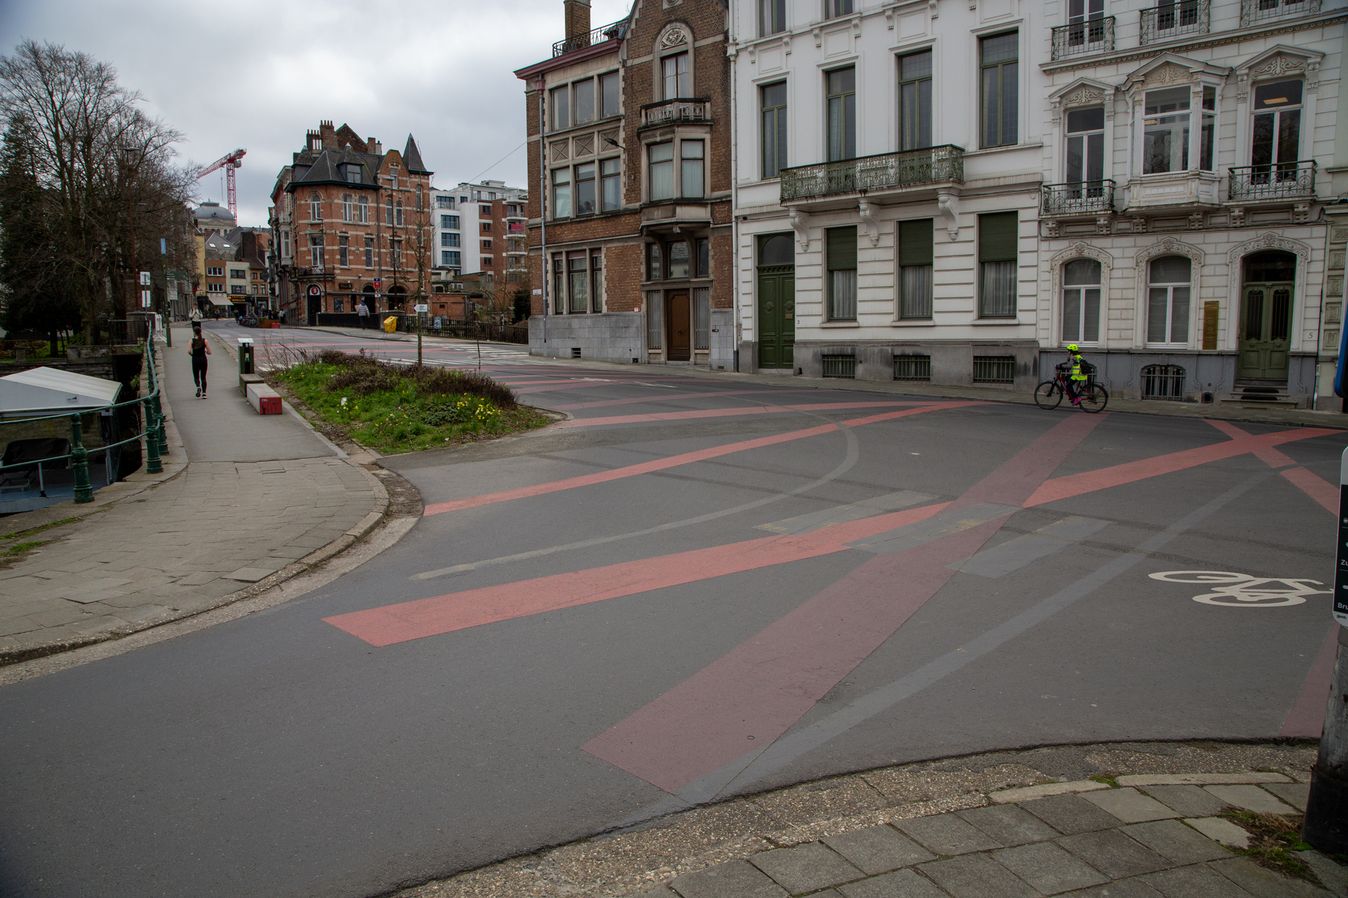 Built for cars, repurposed for bicycles. The paint is to show this is a section border